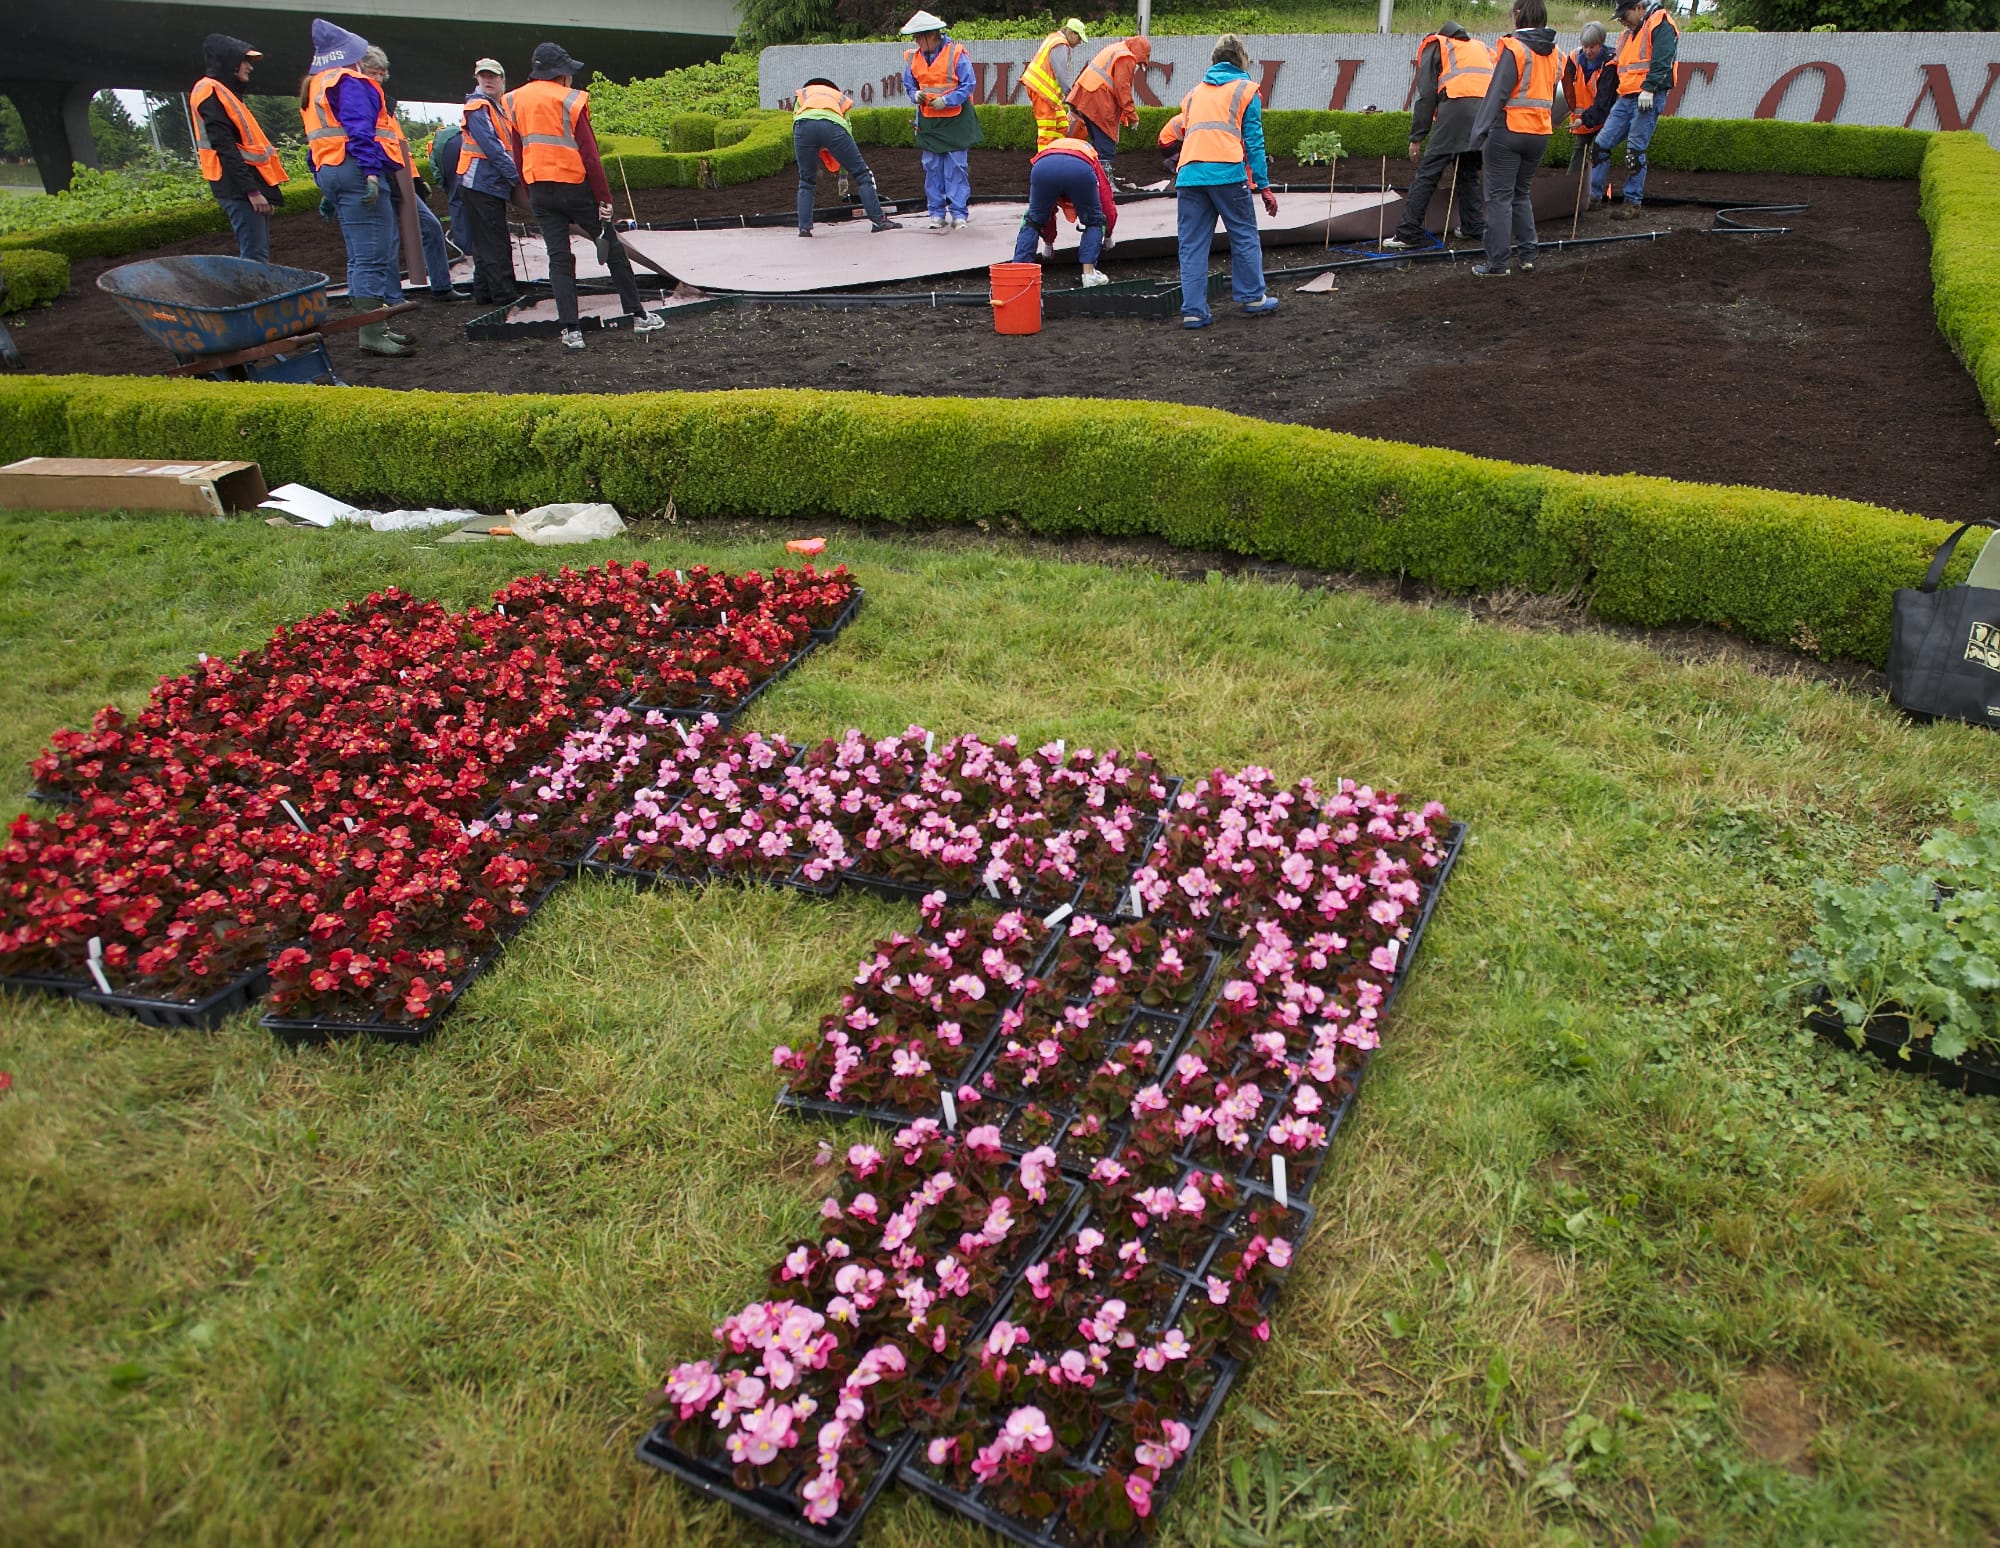 Master Gardener Foundation of Clark County volunteers prepare to plant flowers Saturday morning in the shape of a steelhead trout underneath the Welcome to Washington sign along Interstate 5.